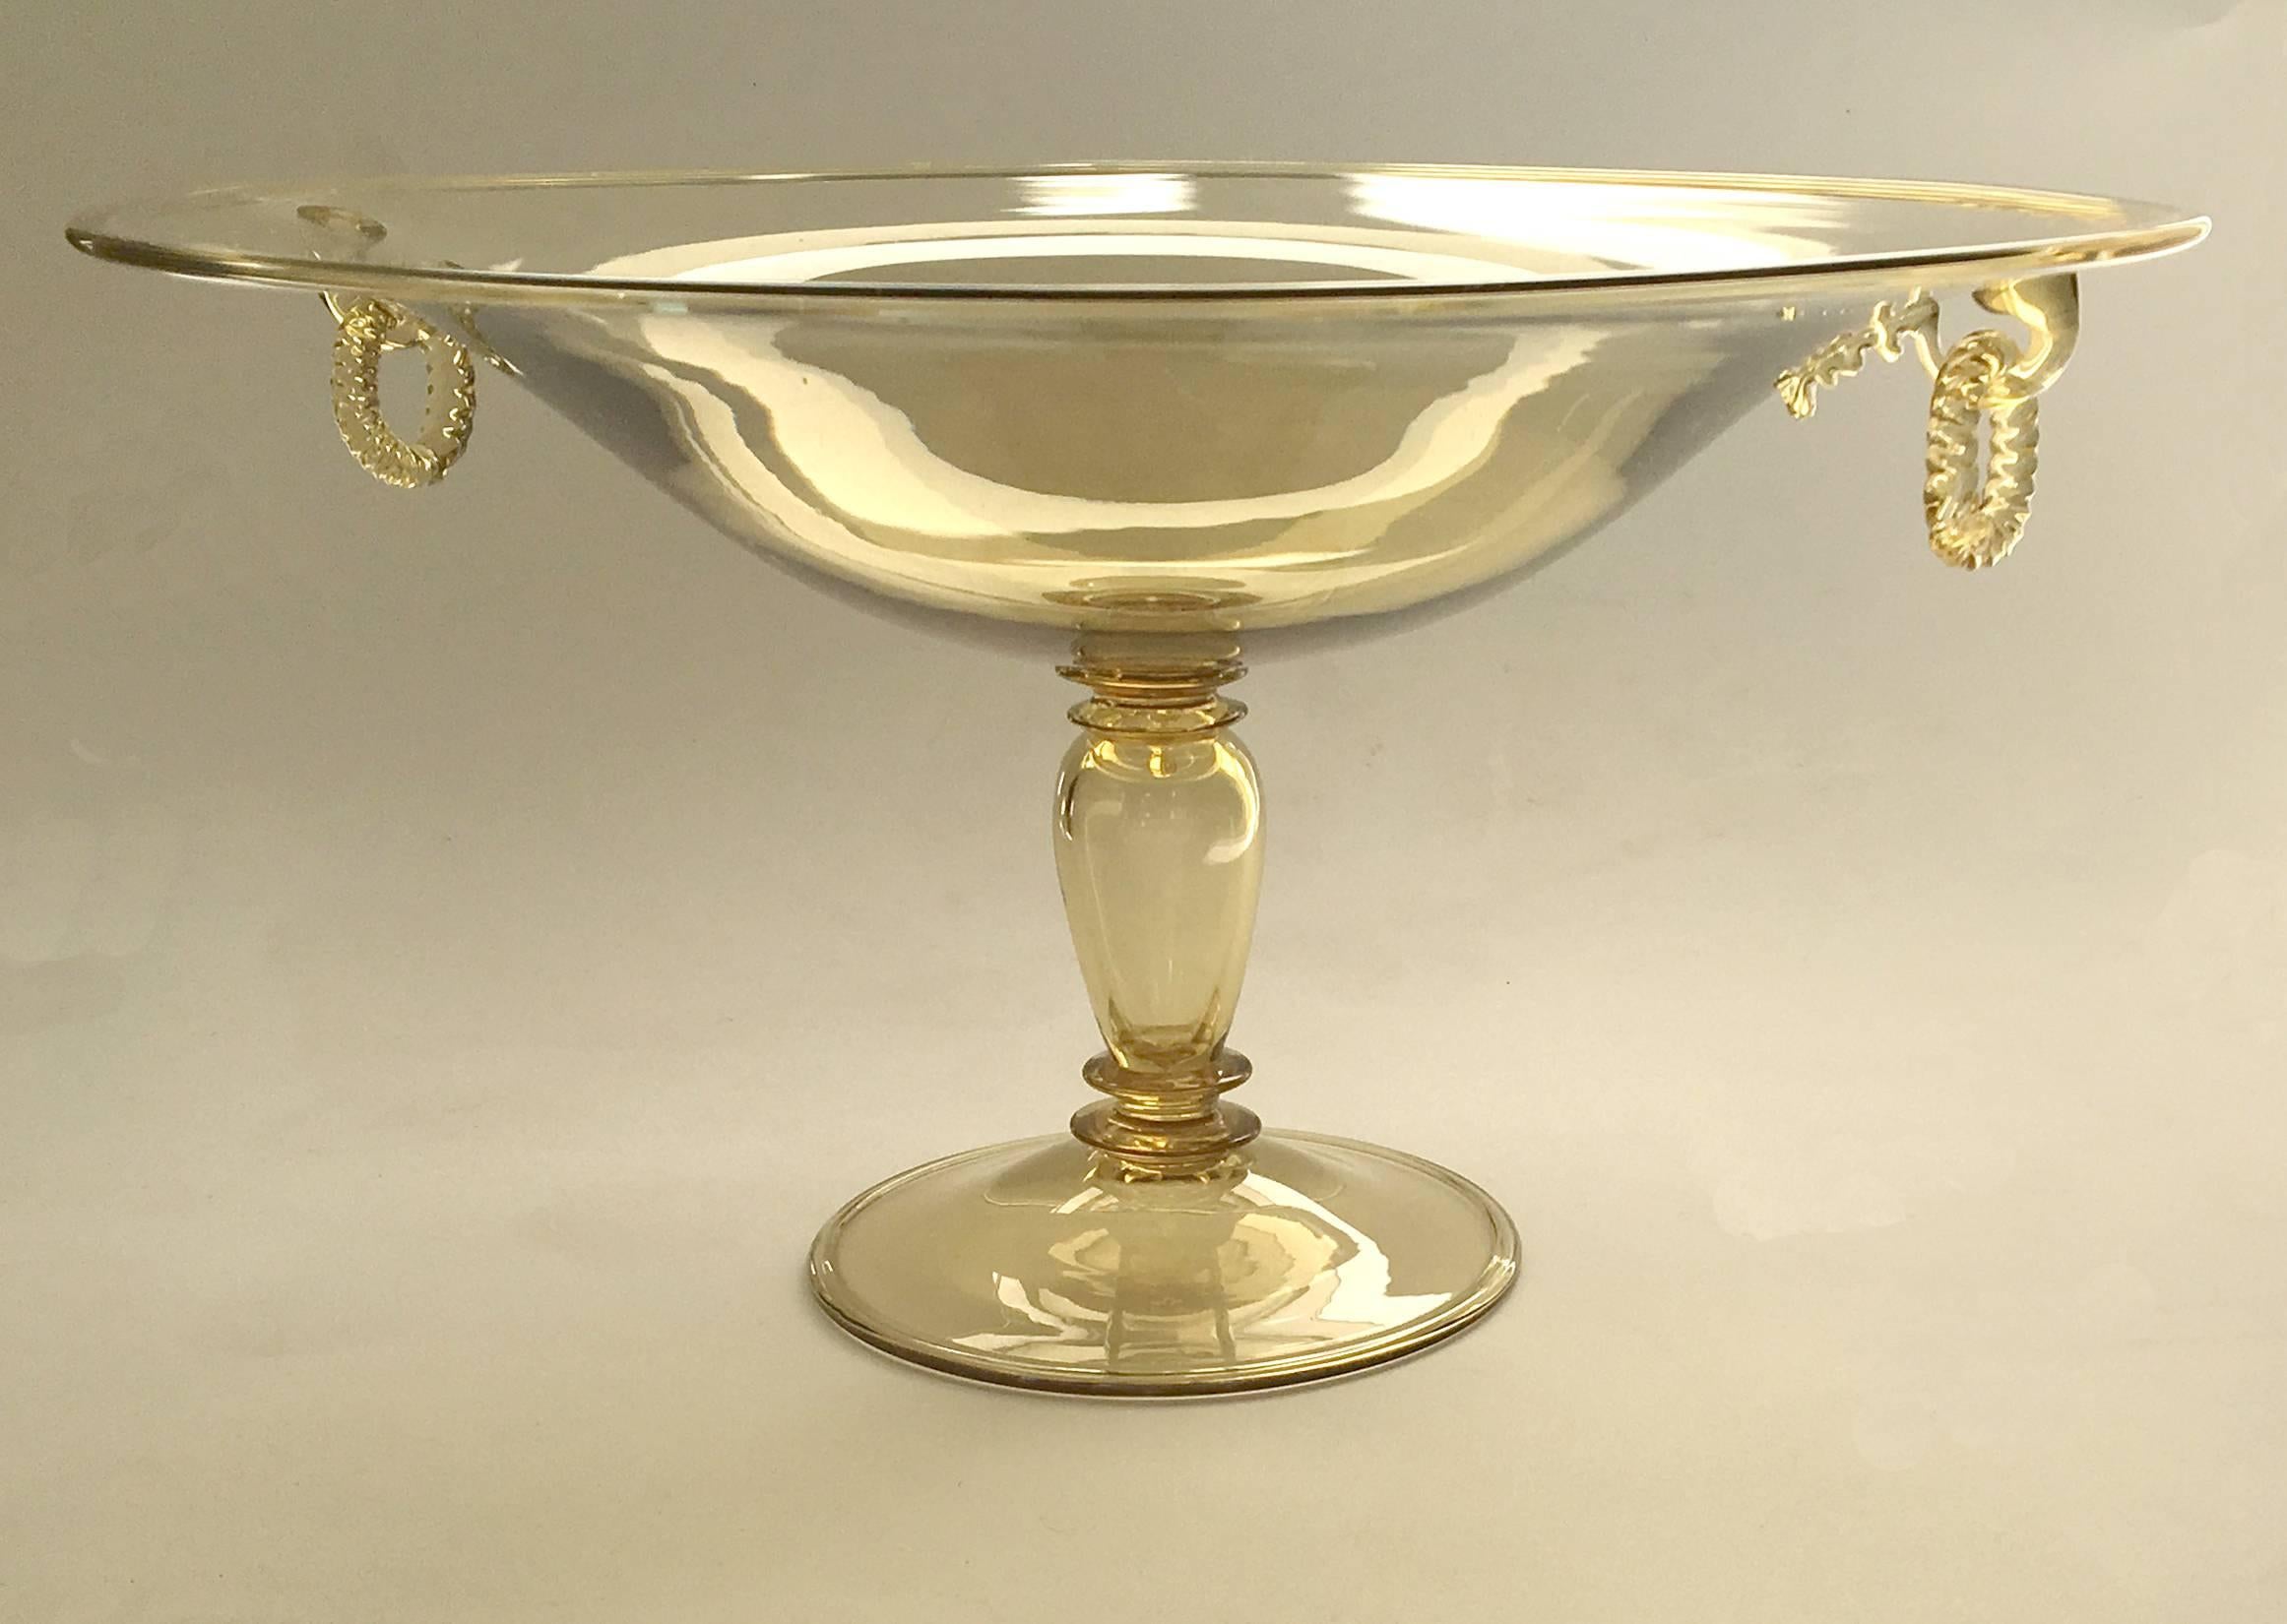 An early Steuben glass shallow bowl, with original twist rope glass ring handles, on pedestal. elegant light citrine color. Rare and unusual with the same color handles. Unmarked.